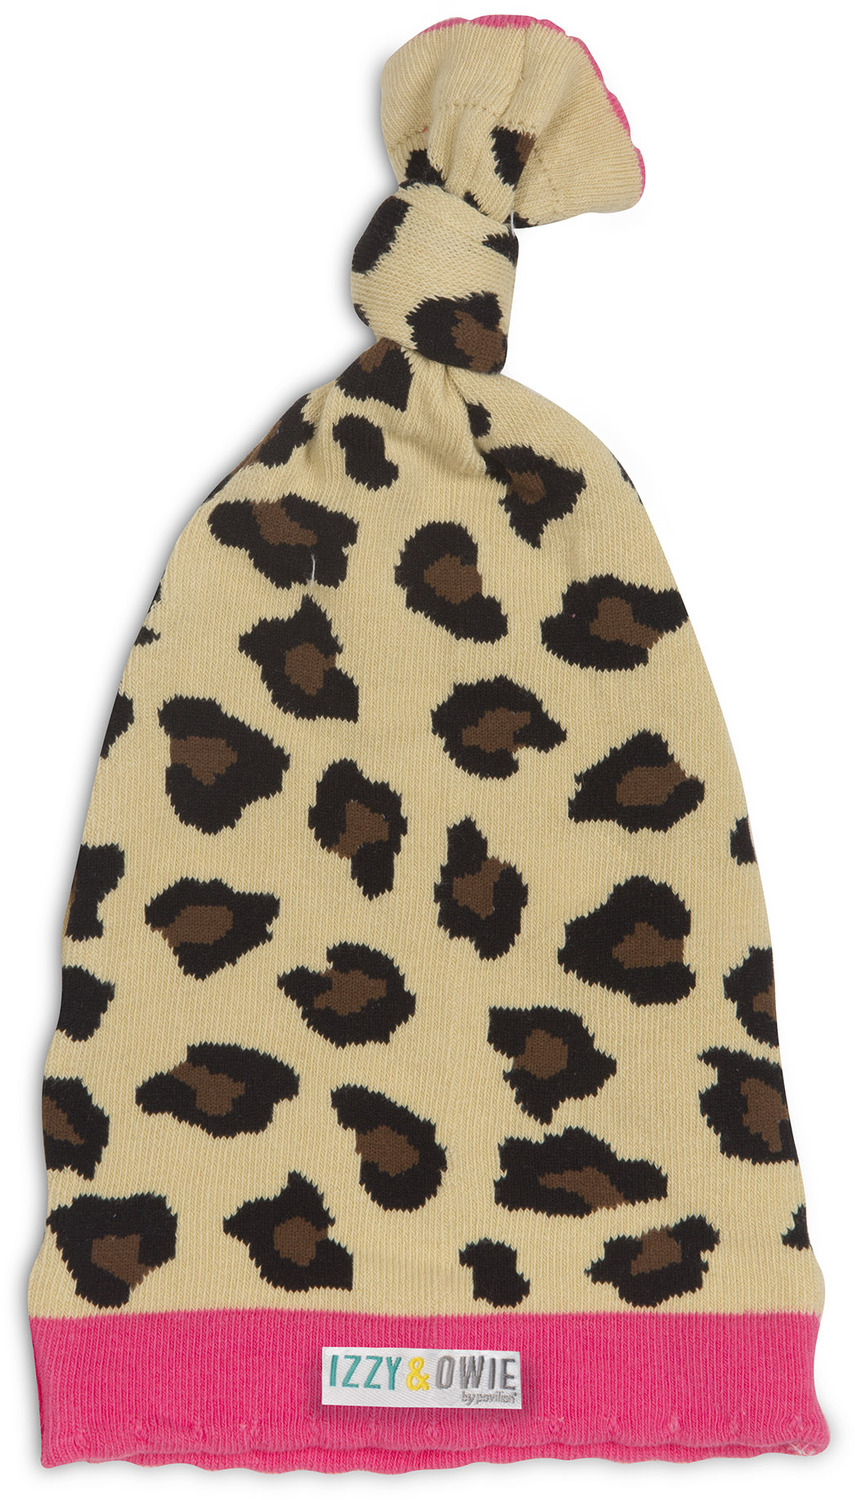 Jungle Cat by Izzy & Owie - Jungle Cat - One Size Fits All Baby Hat